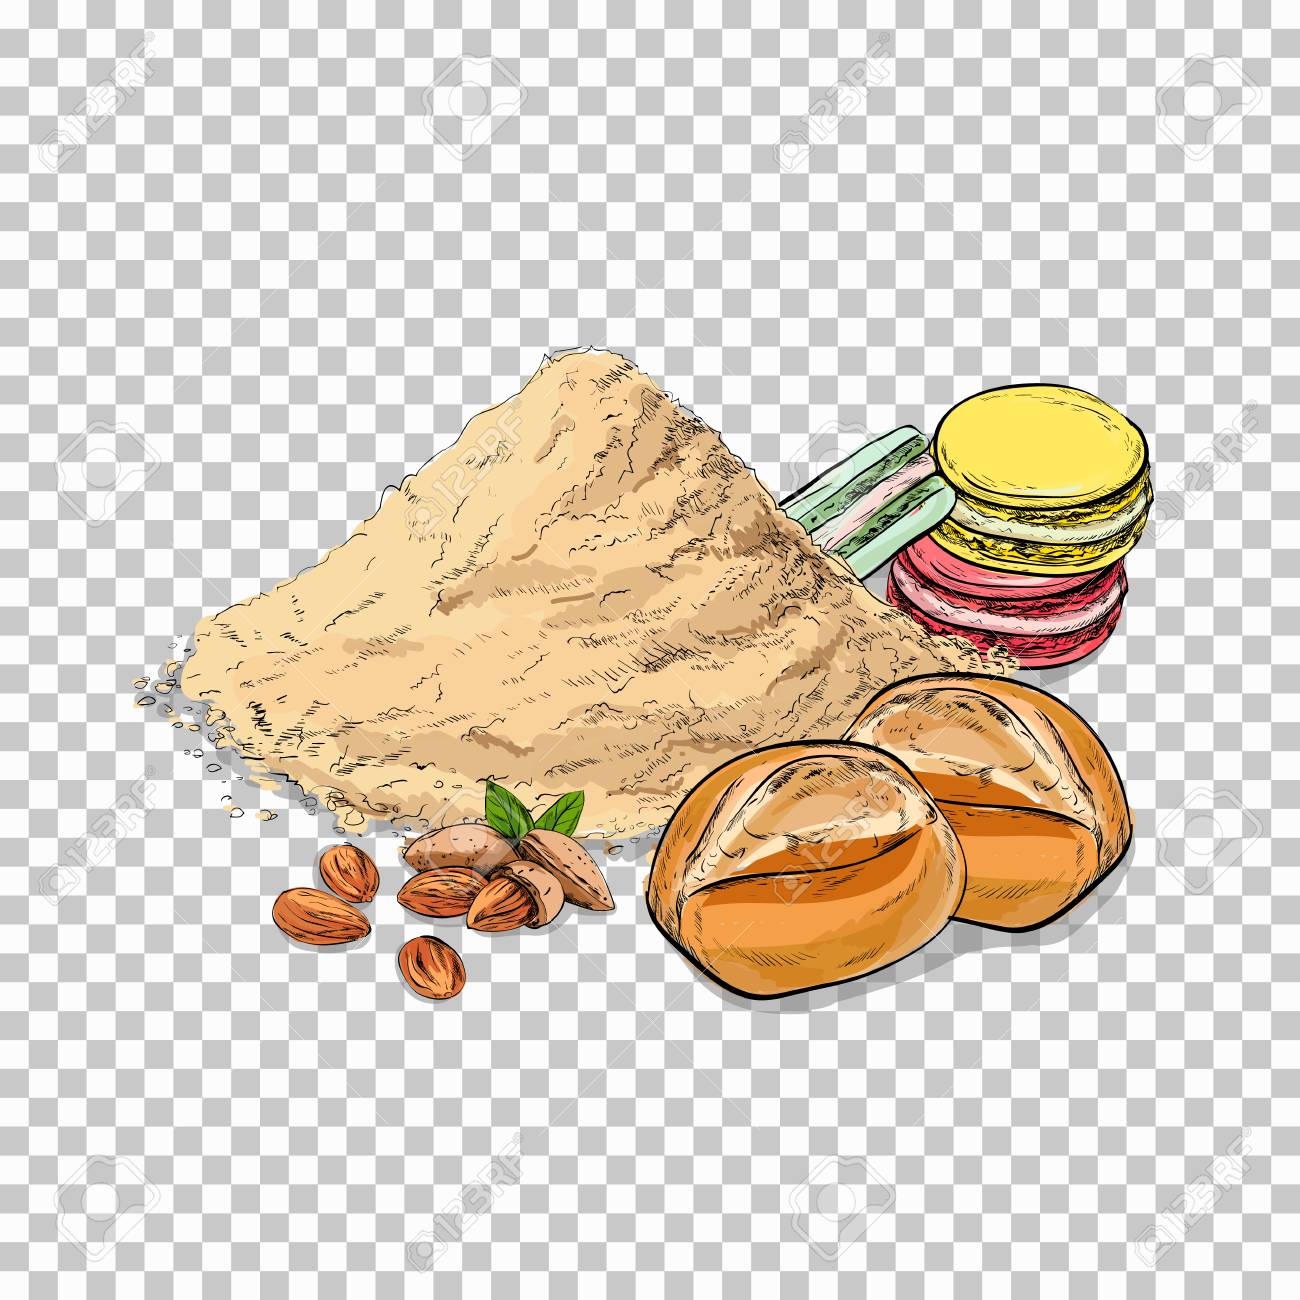 Flour And Baking Piece Of Cake Cookie On Transparent Background